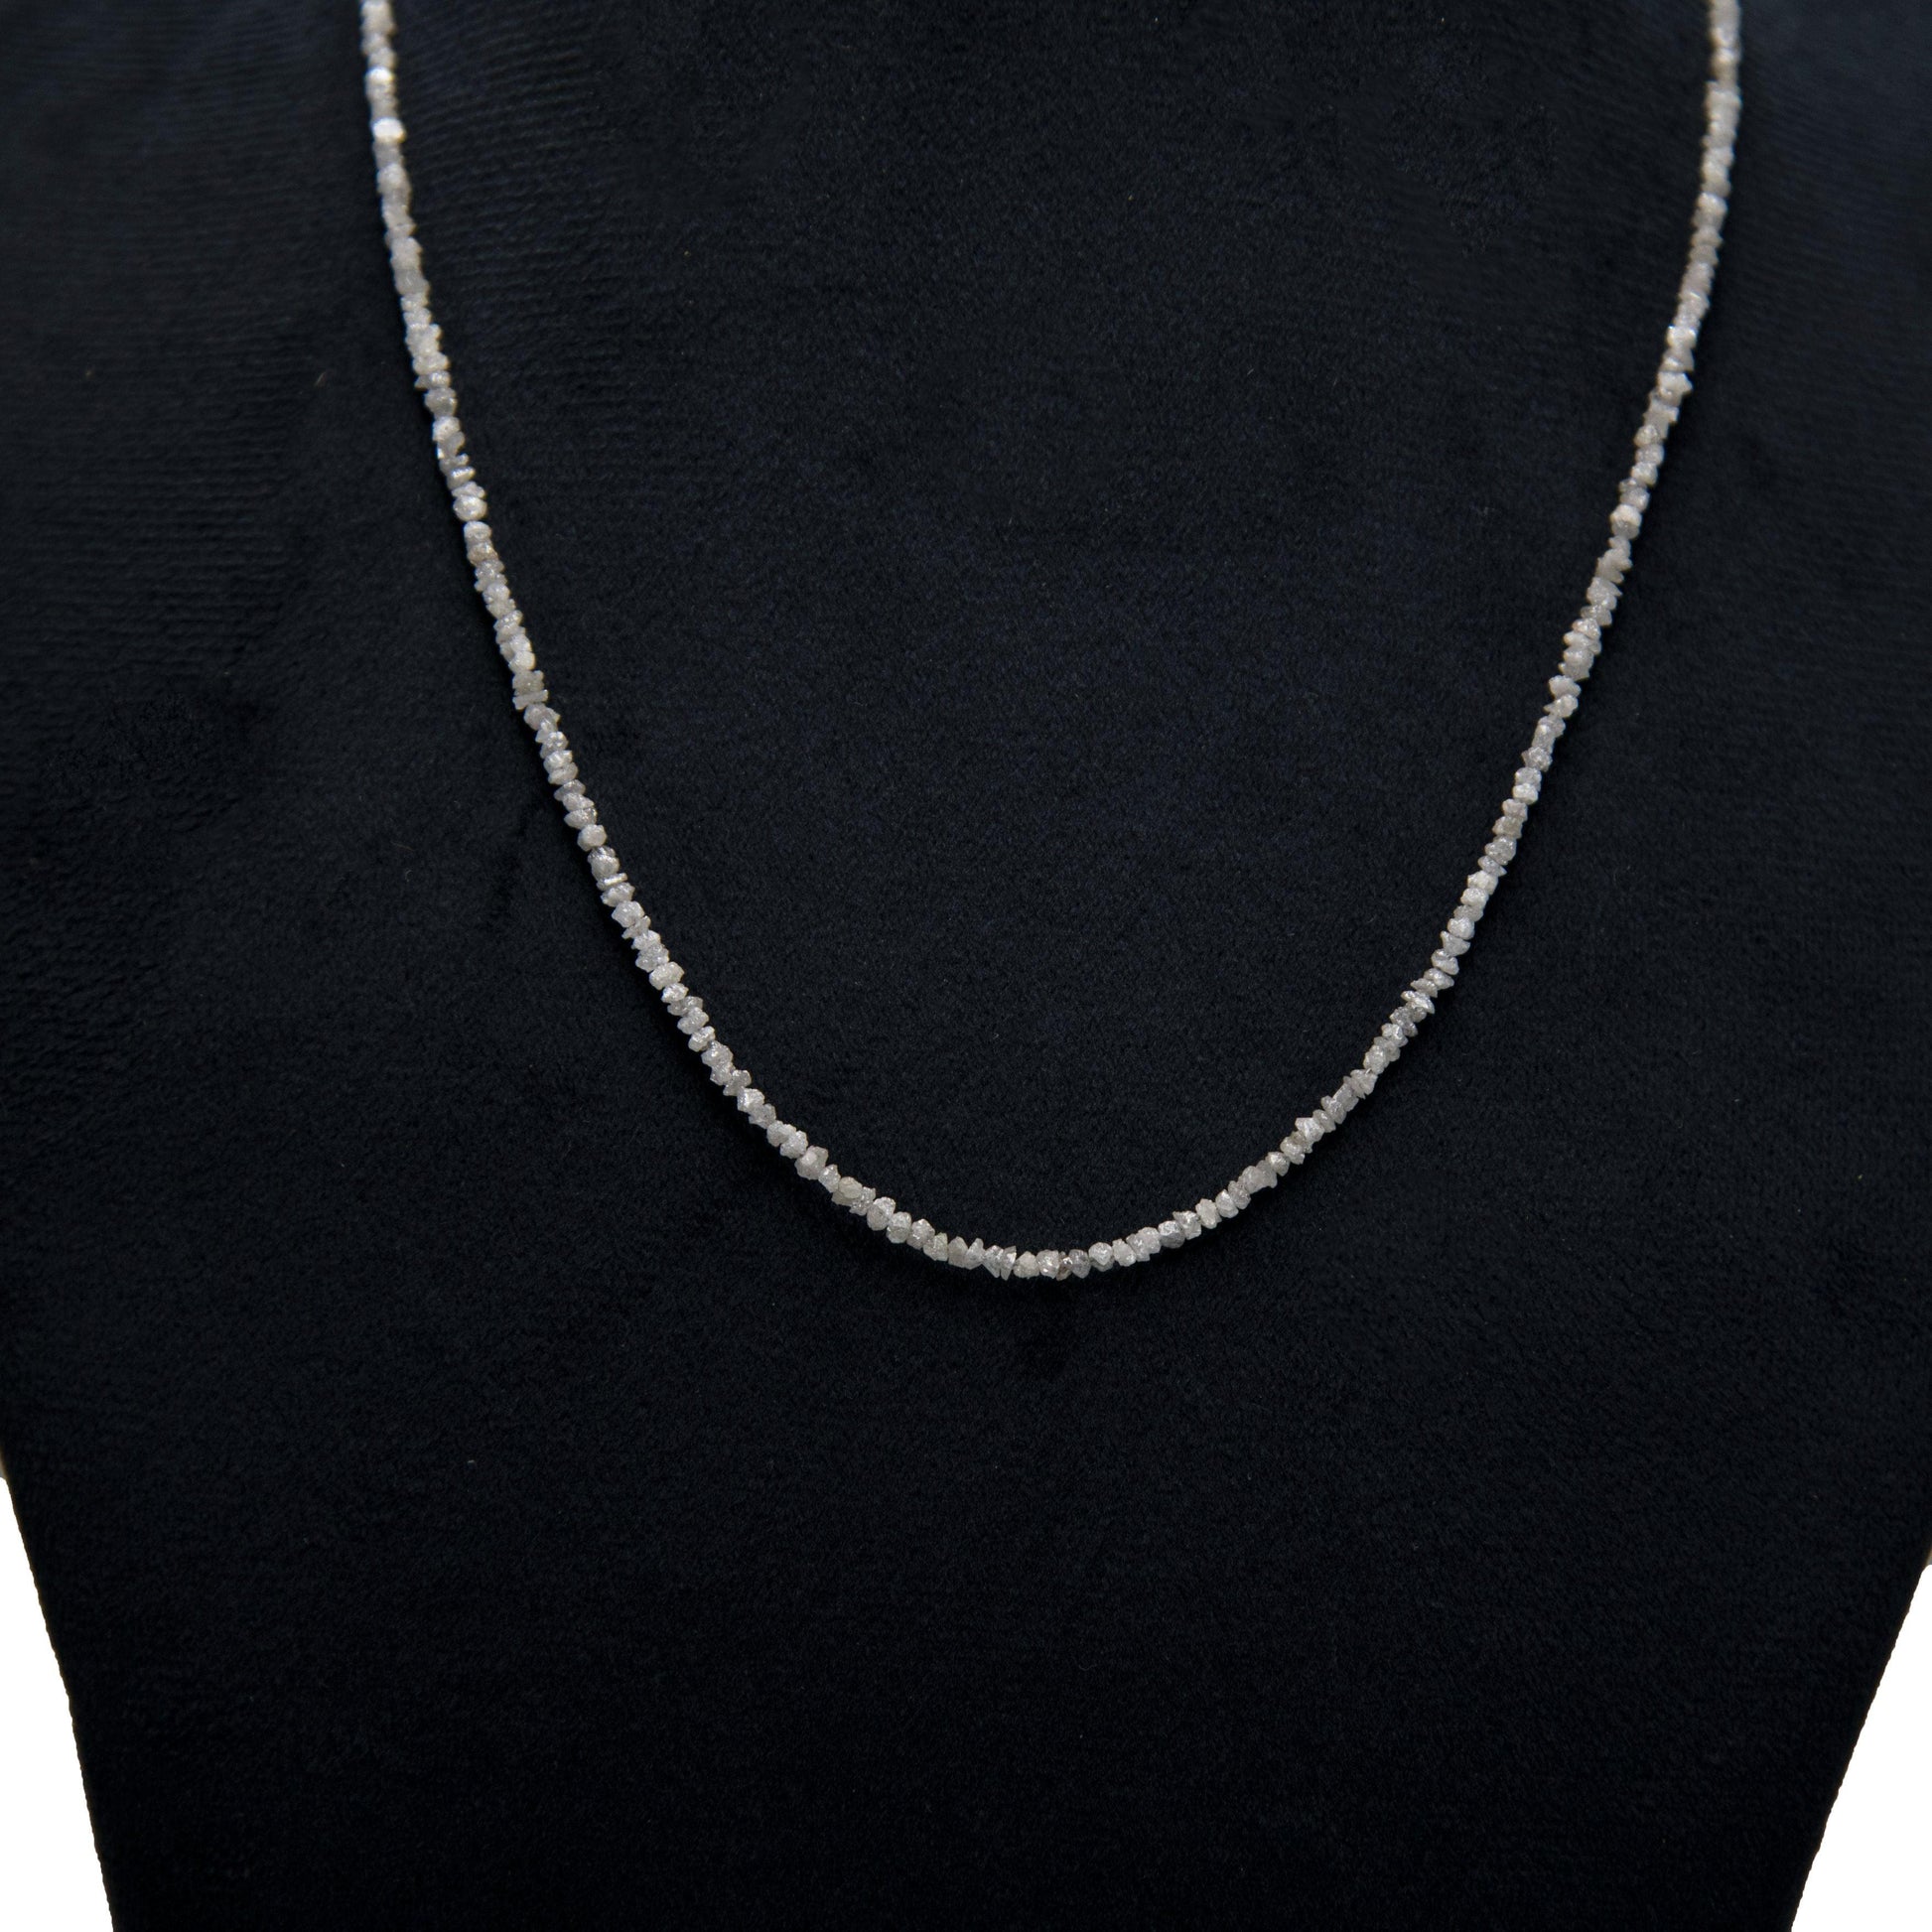 Small silver Rough Diamond Bead Necklace with Silver Clasp - DeKulture DKW-1380-Small-BNK